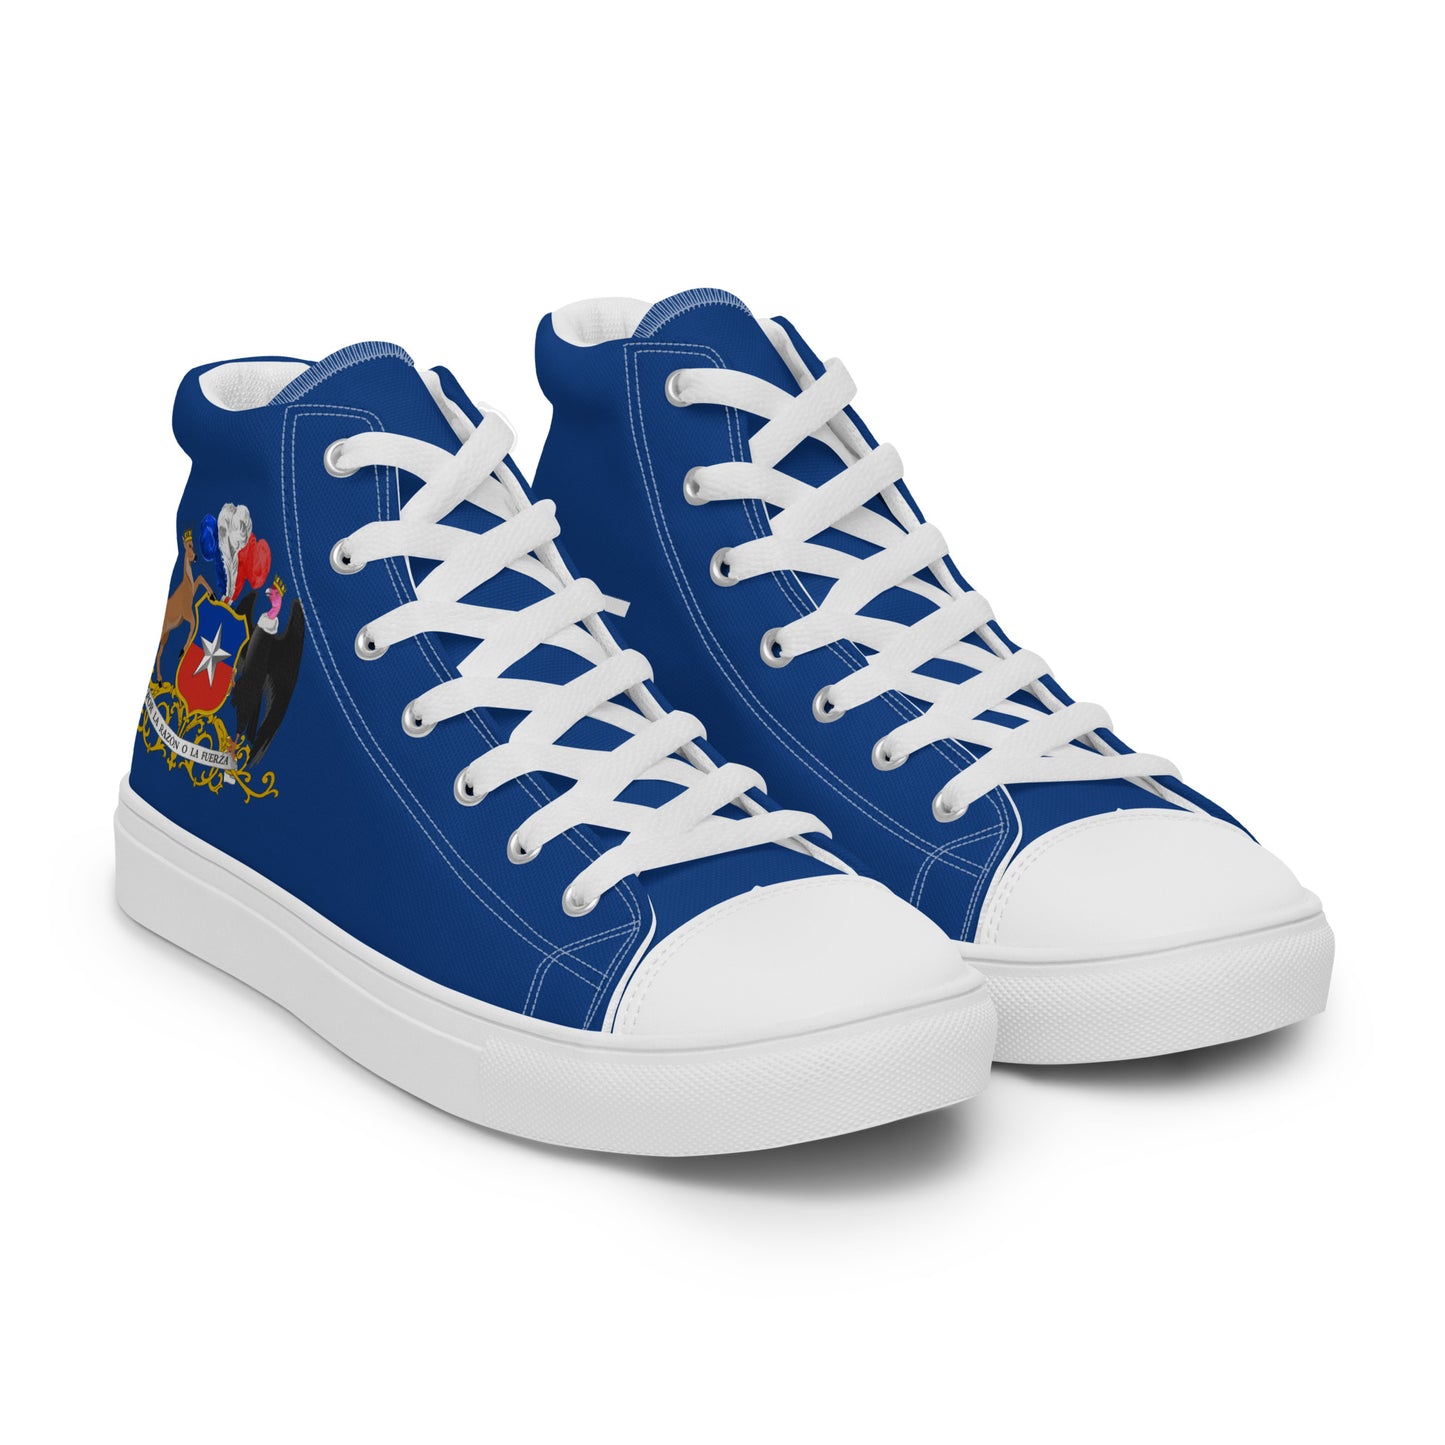 Chile - Women - Blue - High top shoes